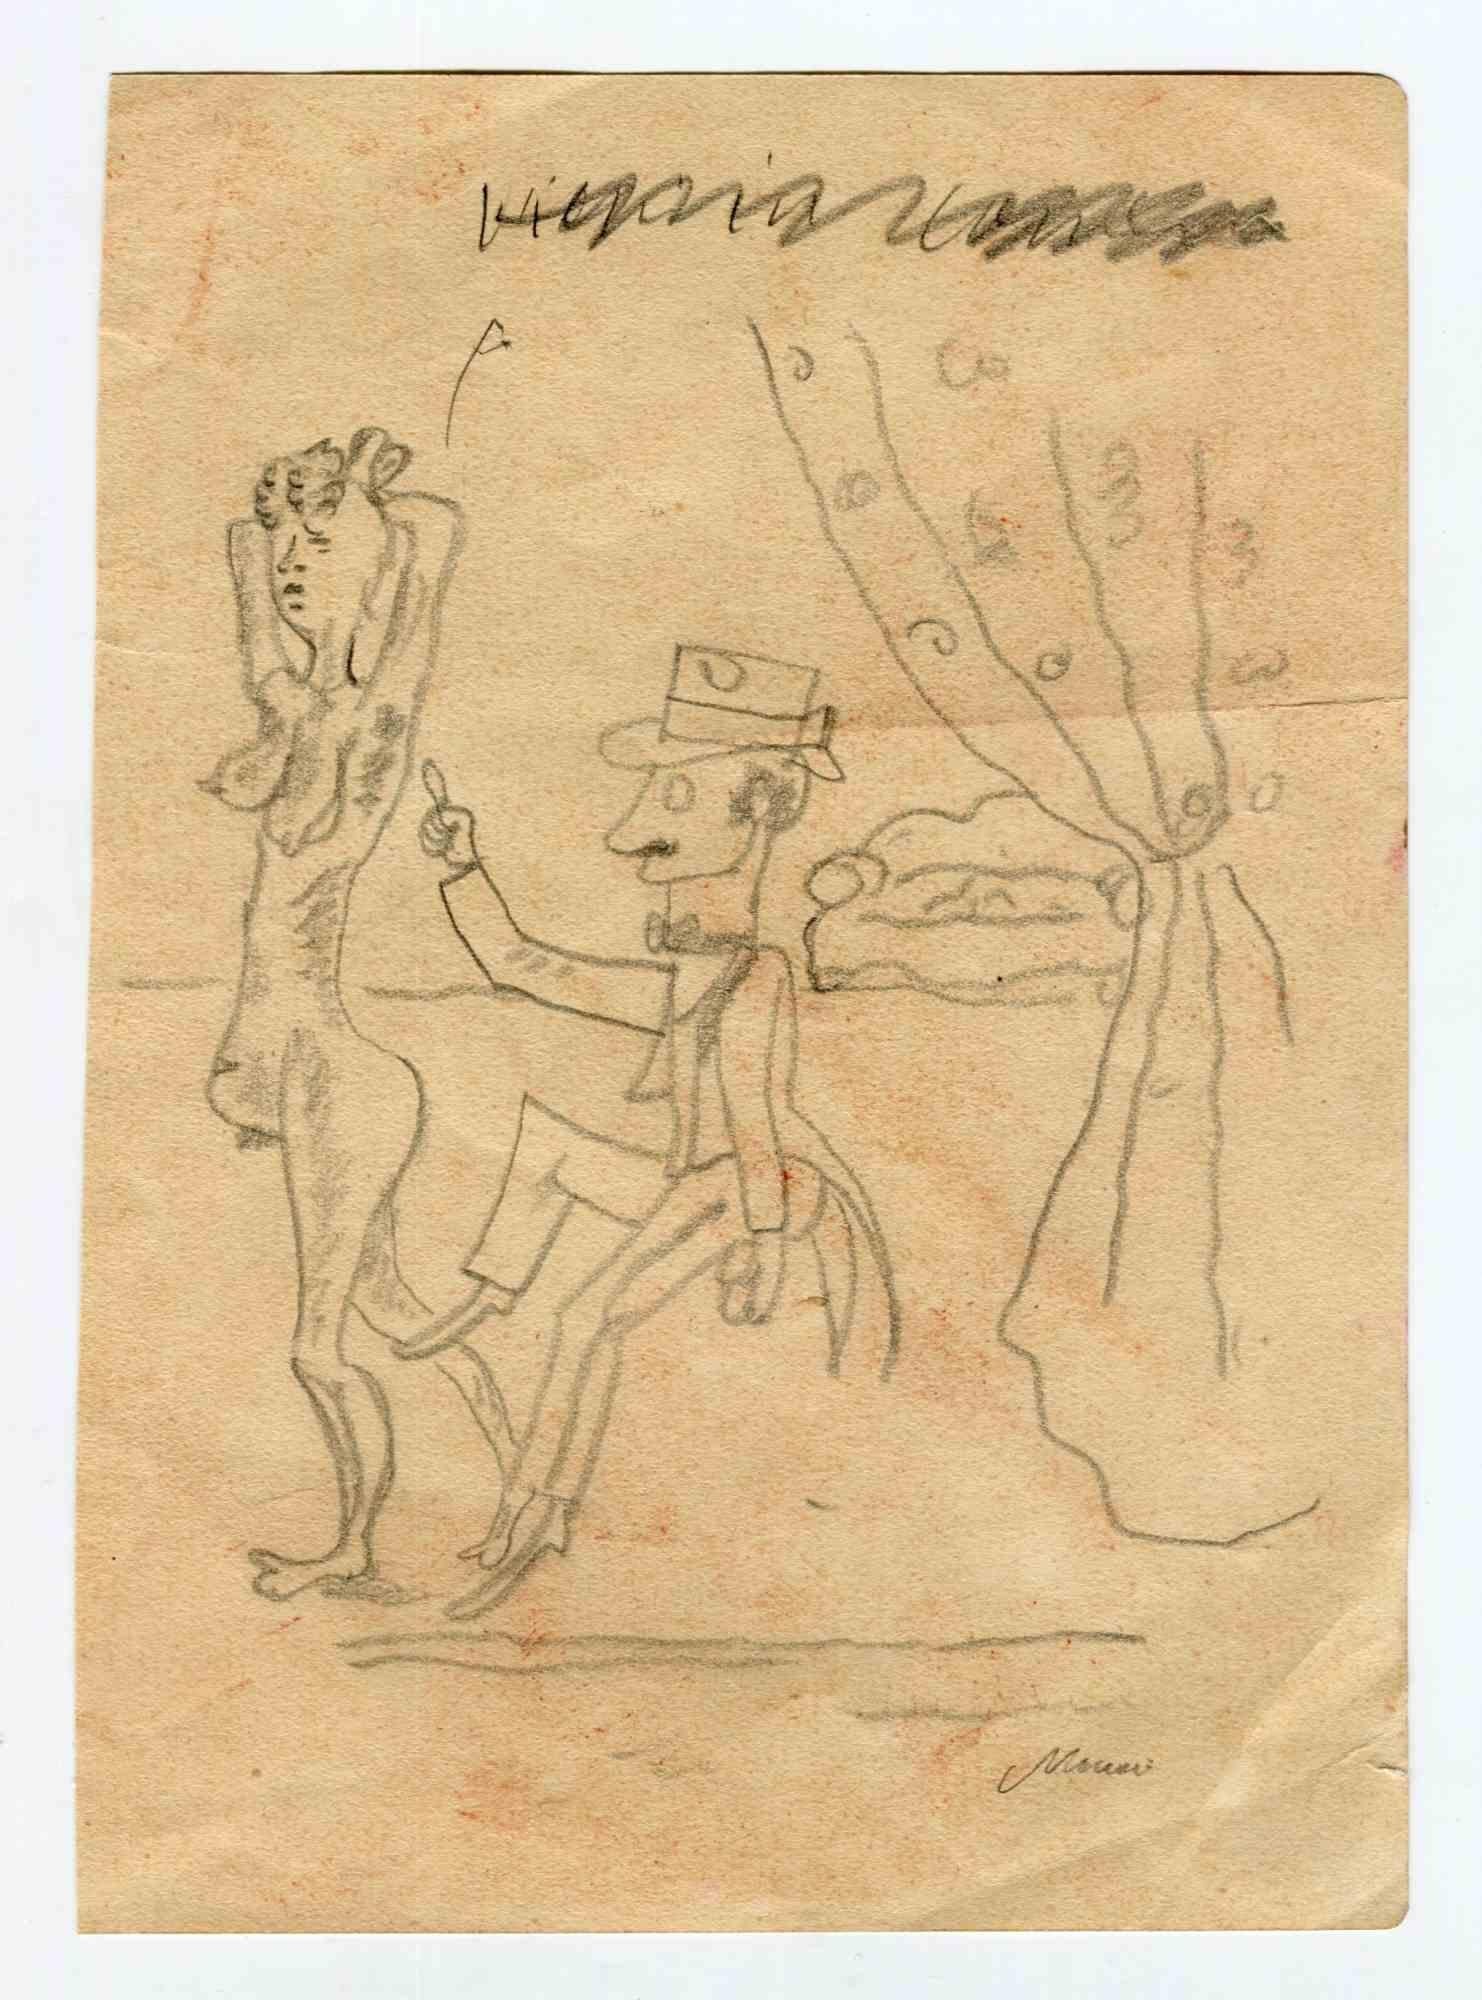 Figures is an original drawing in Pencil realized by Mino Maccari in the mid-20th Century.

Good condition.

The artwork is depicted through strong strokes in a well-balanced composition.